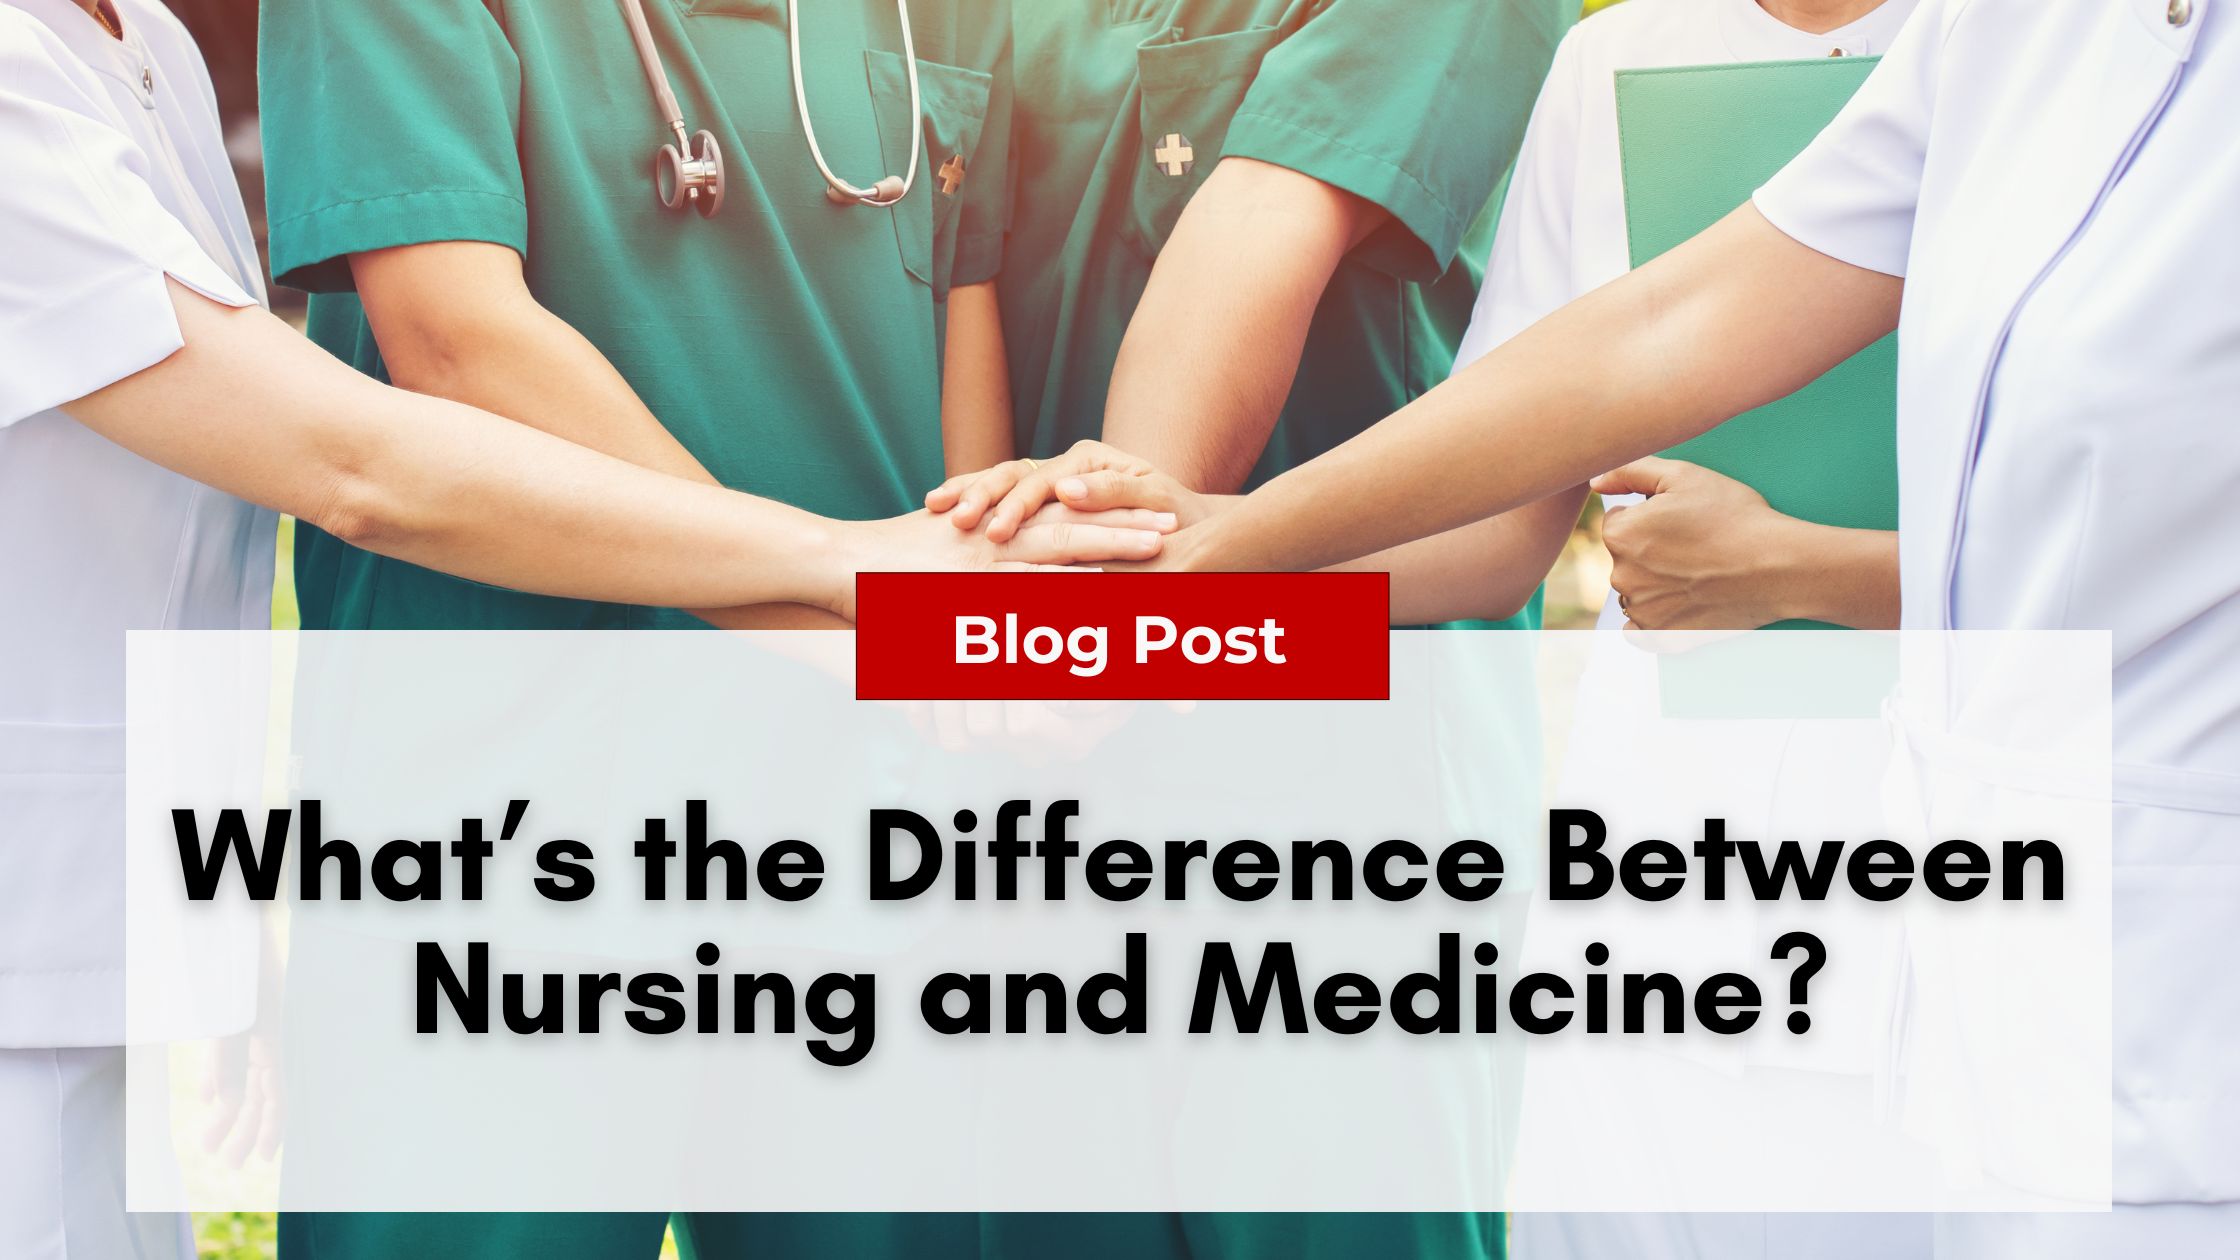 Group of healthcare professionals in uniforms stacking hands overlaid with the text "Blog Post: What’s the Difference Between Nursing and Medicine? Understand Nurse Practitioner Burnout.